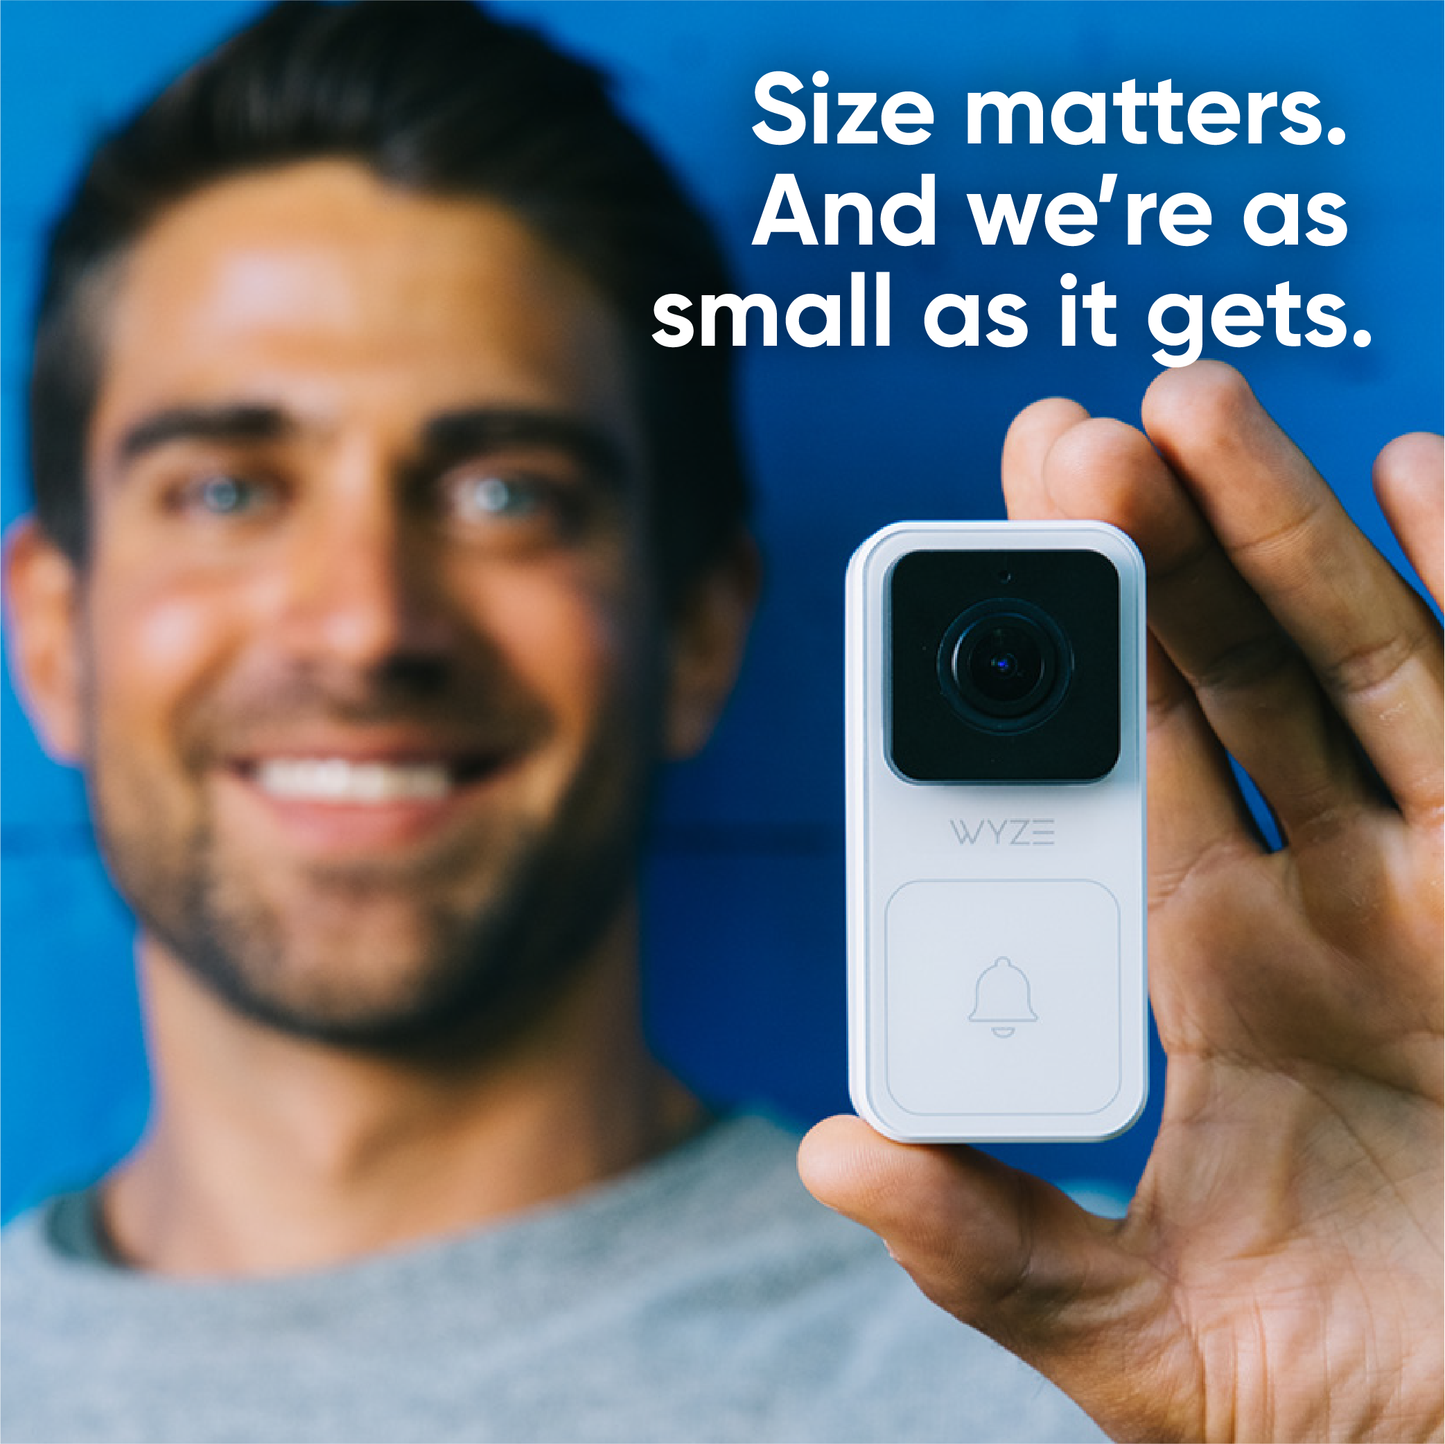 Man holding a small Wyze Video Doorbell unit between his thumb and middle fingers to show the compact size.